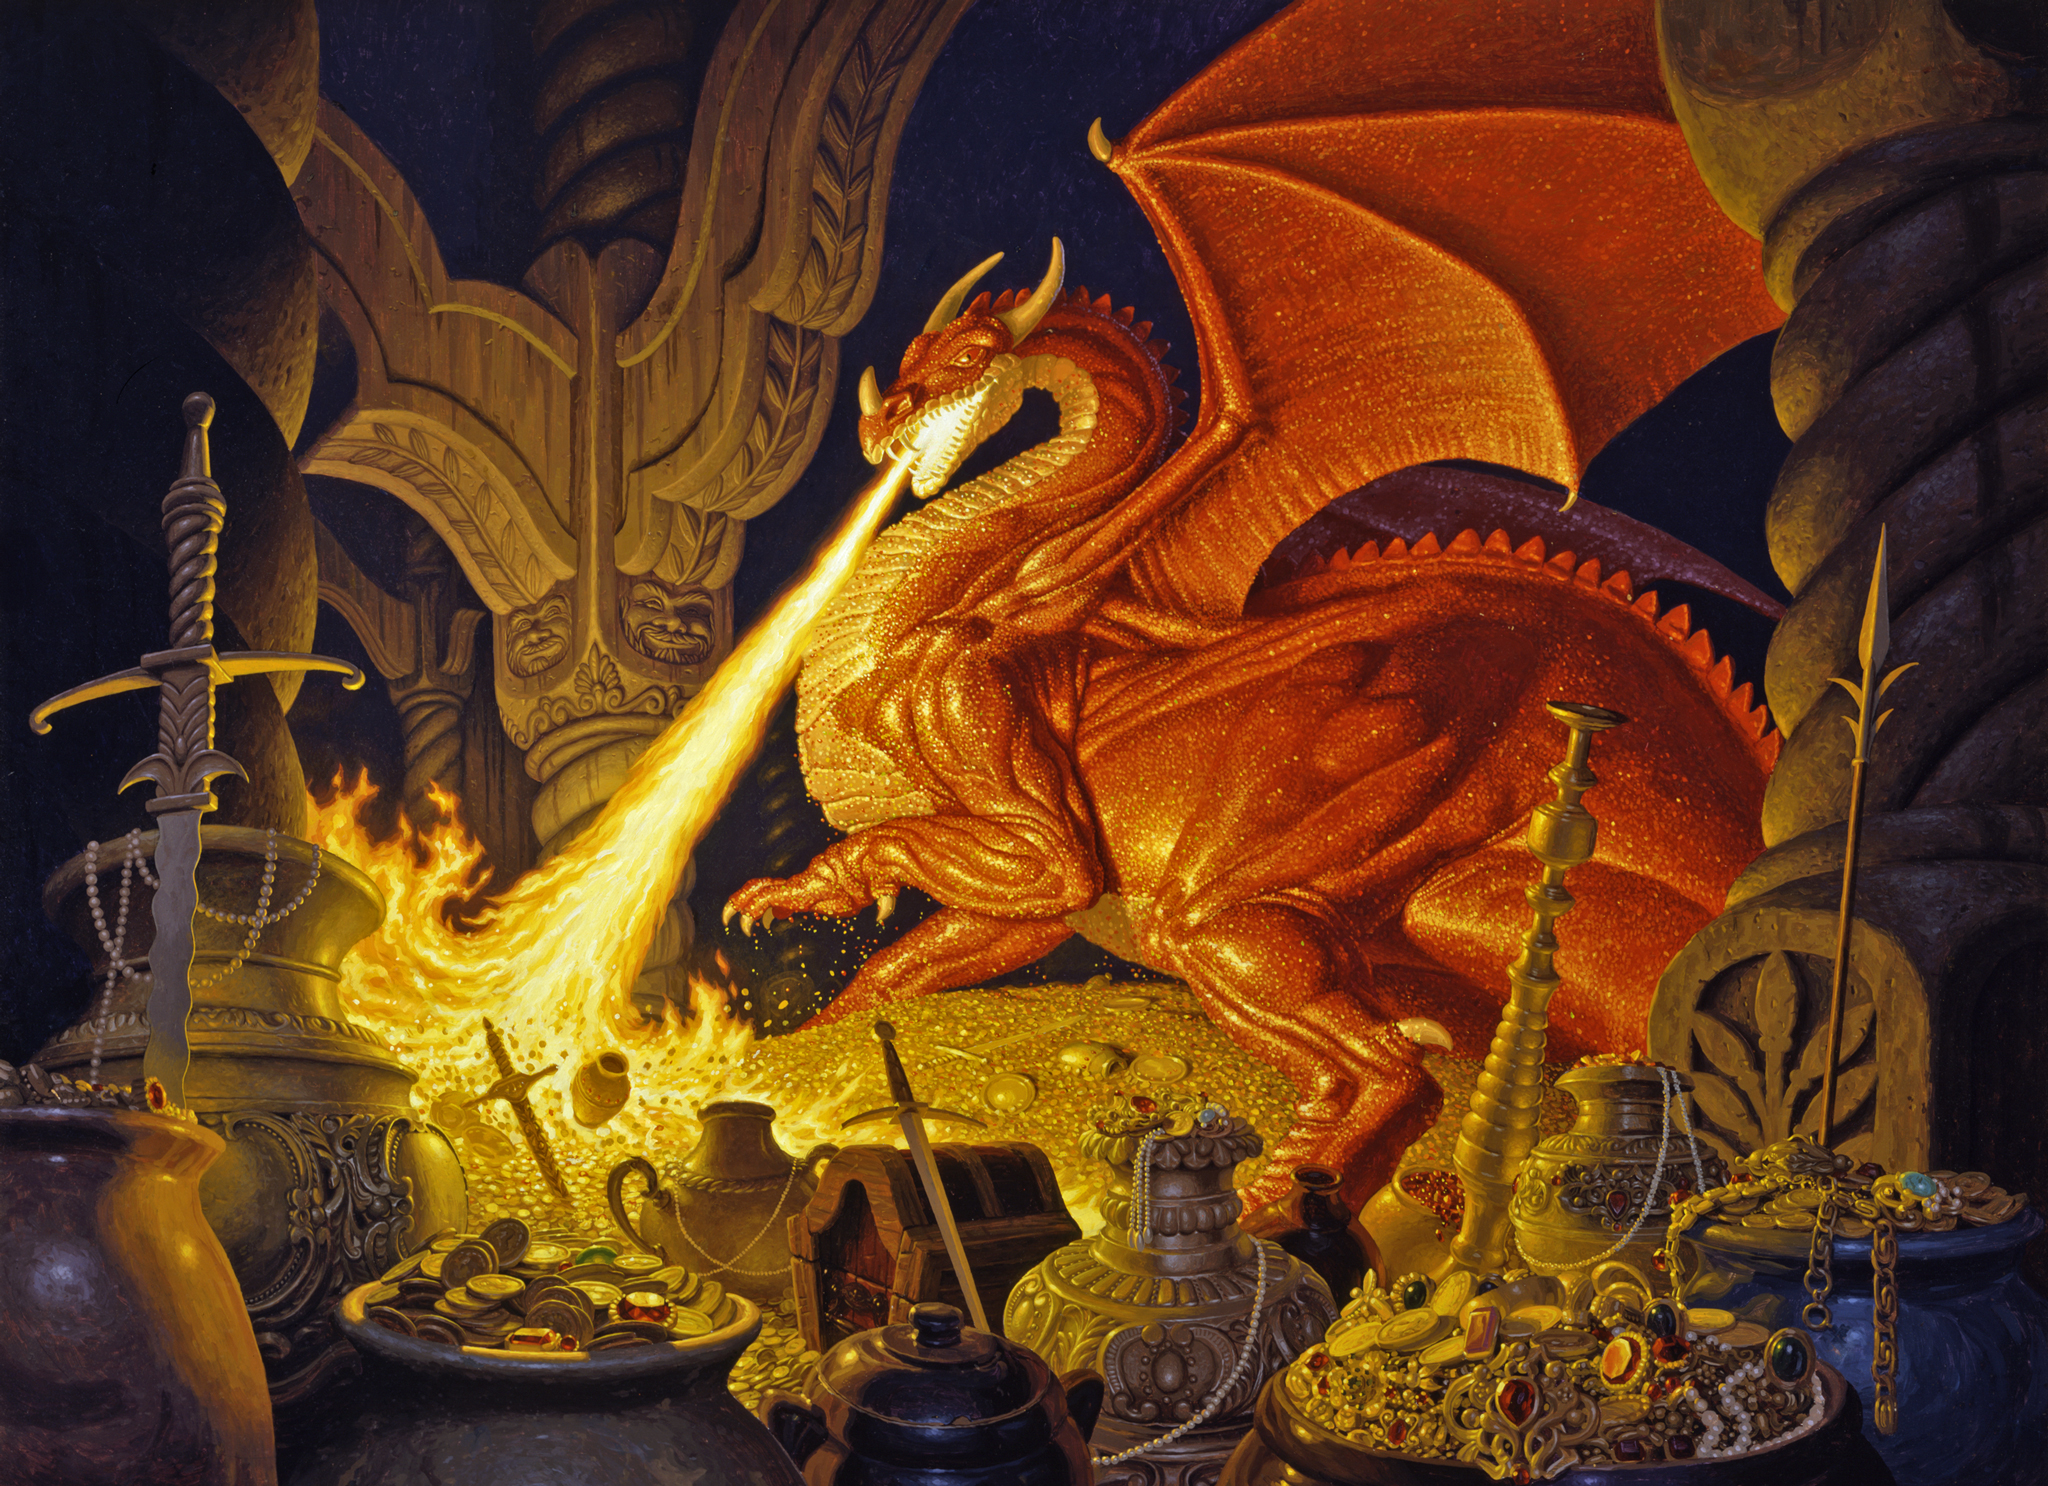 Dragon scale: Why it's impossible to size up Tolkien's Middle-earth